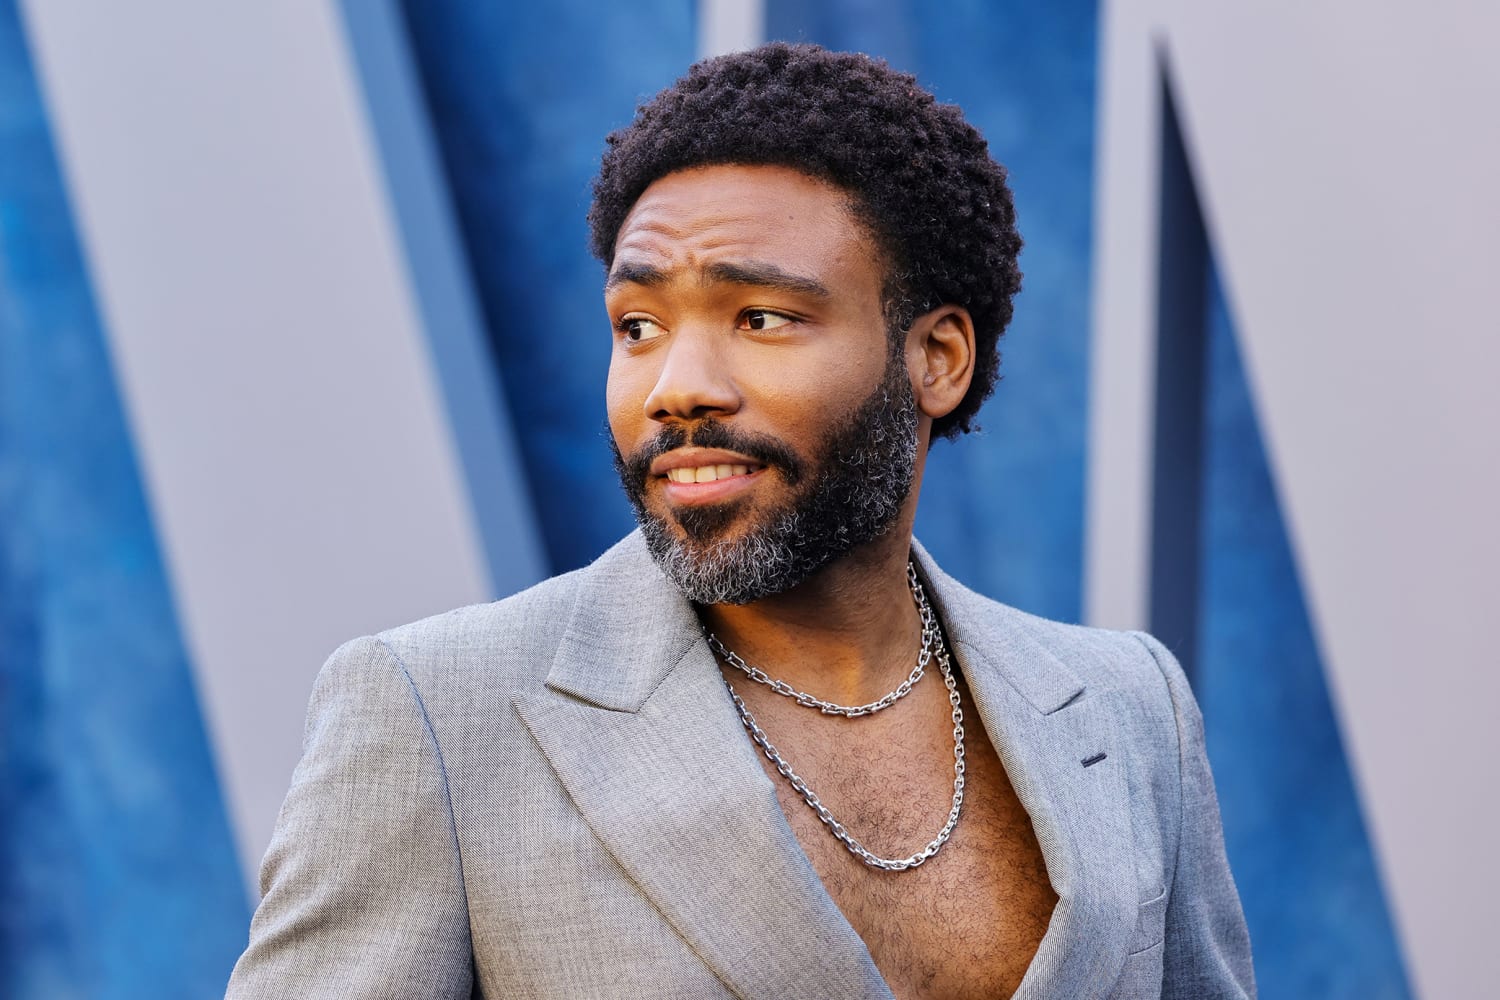 Donald Glover says he struggled with imposter syndrome working on '30 Rock'